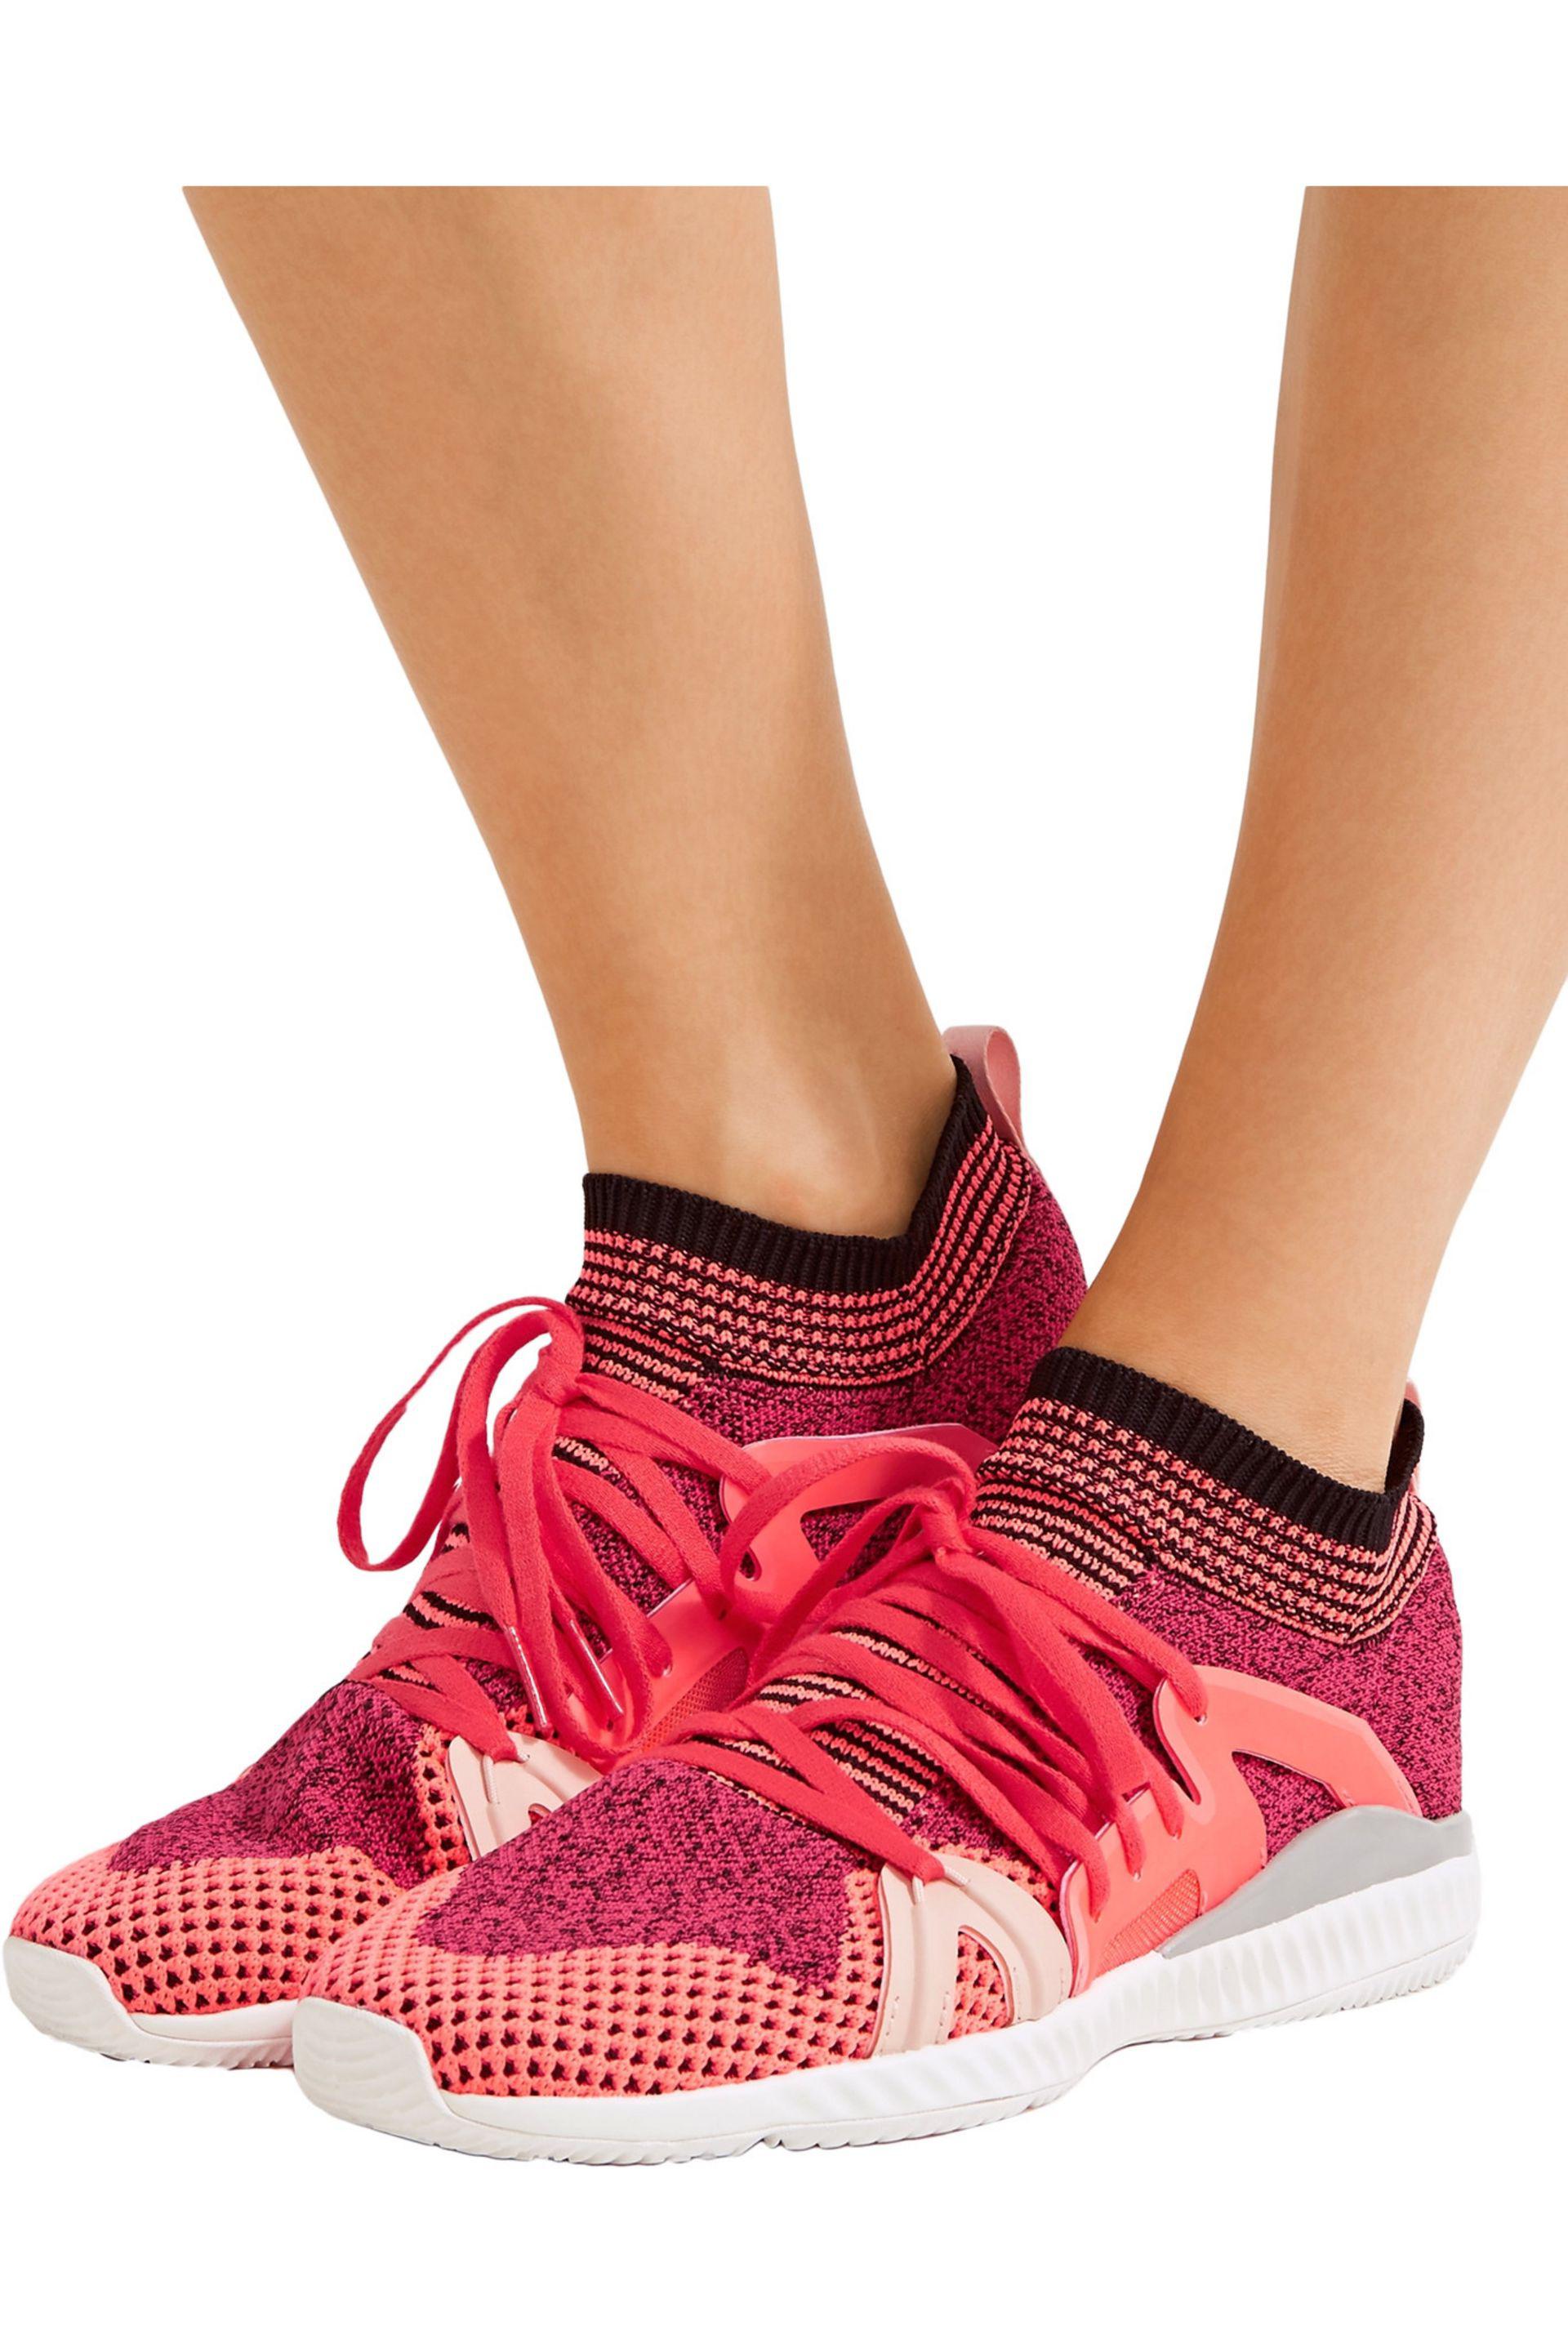 adidas By Stella McCartney Crazy Move Bounce Mesh Sneakers | Lyst